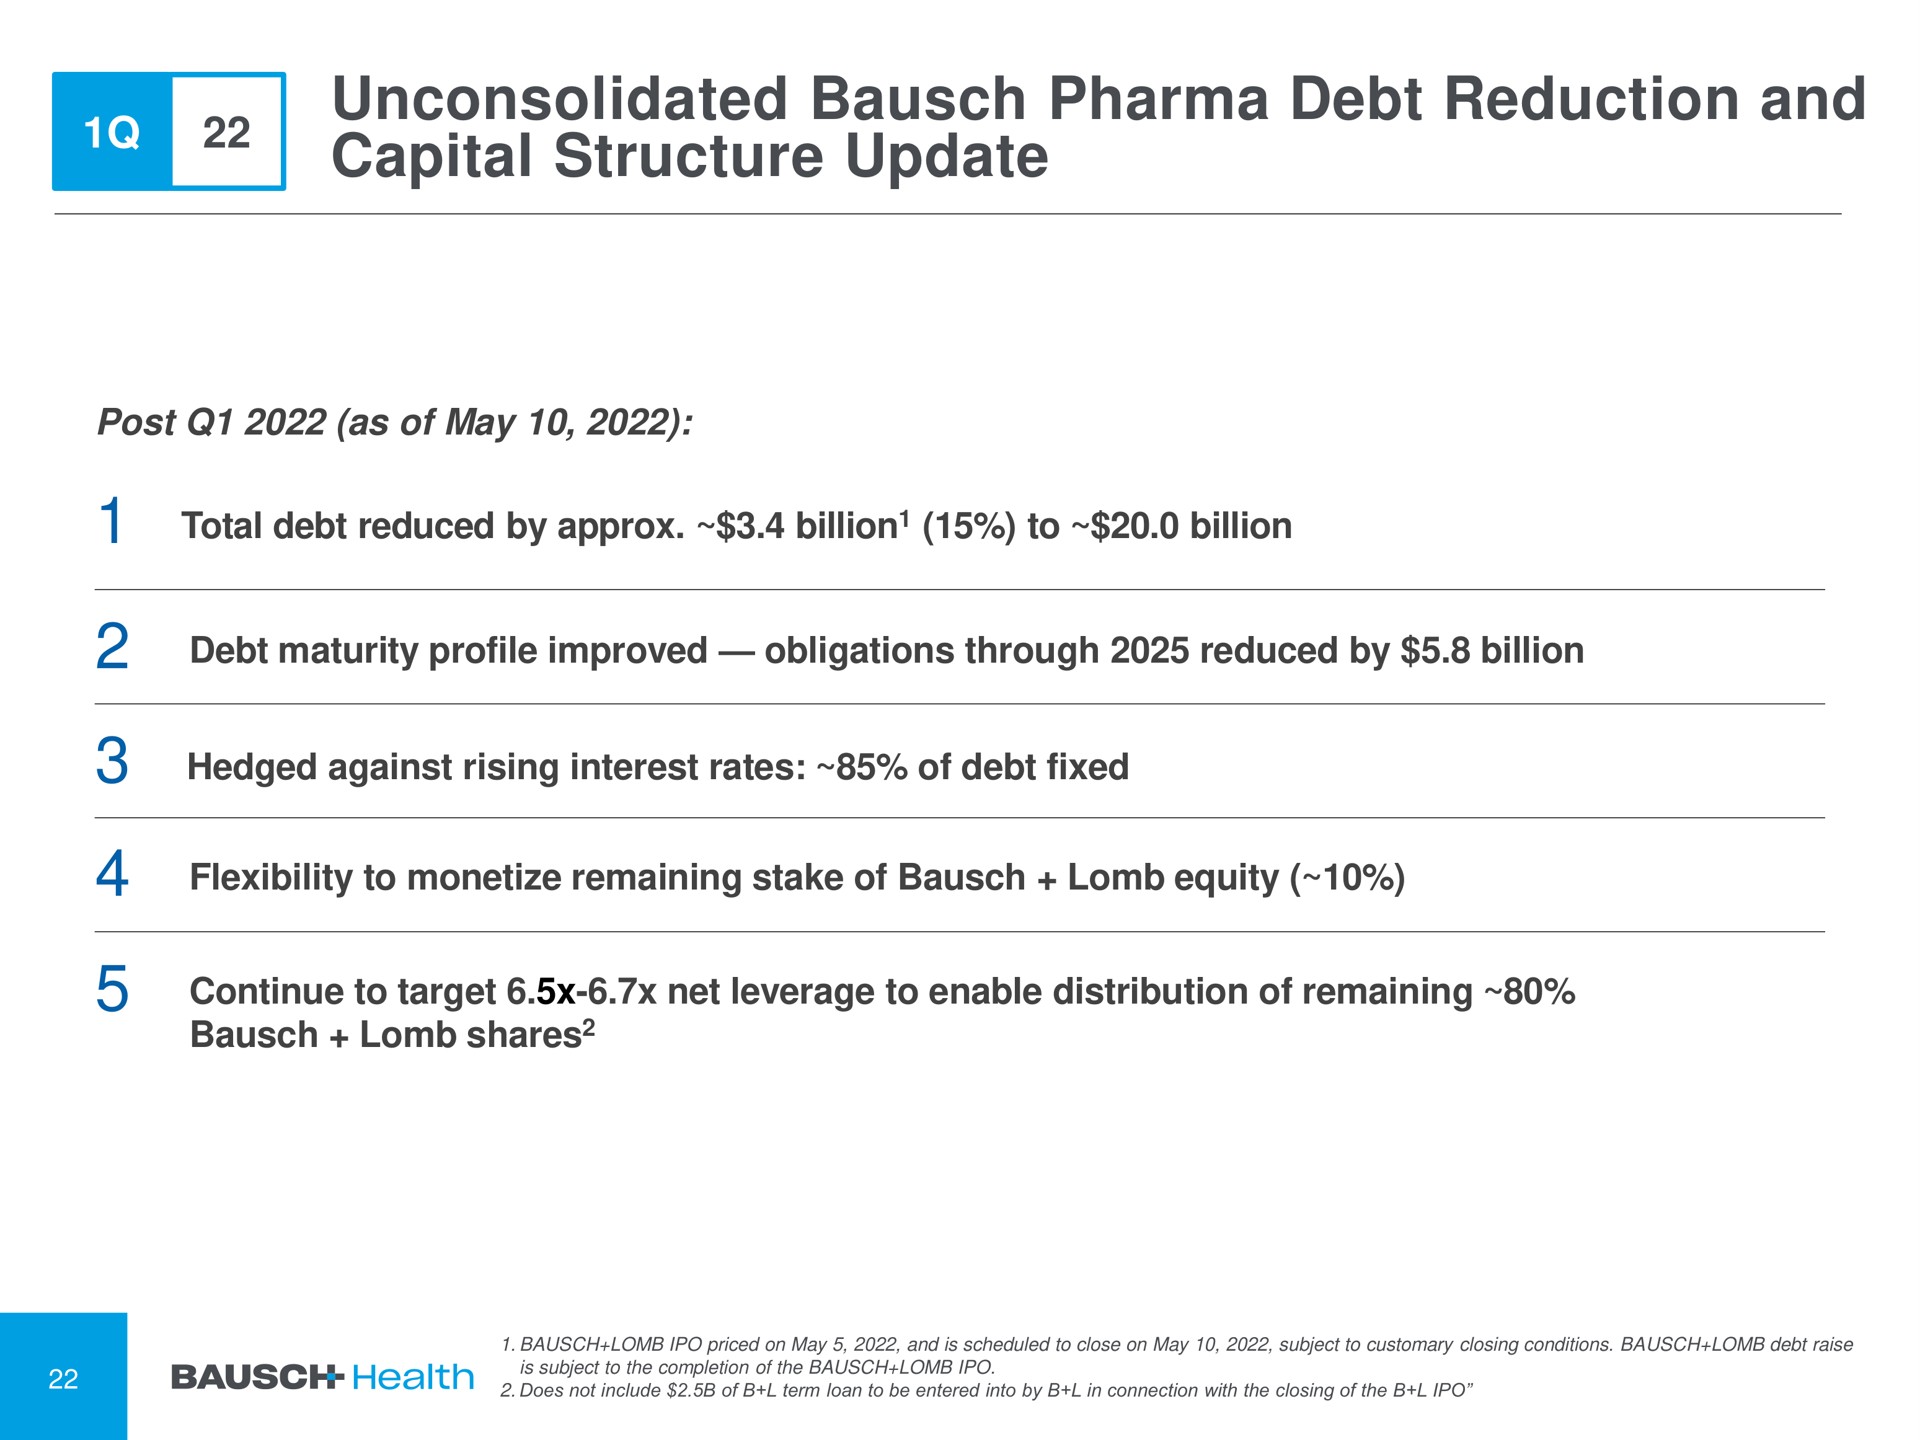 unconsolidated debt reduction and capital structure update | Bausch Health Companies